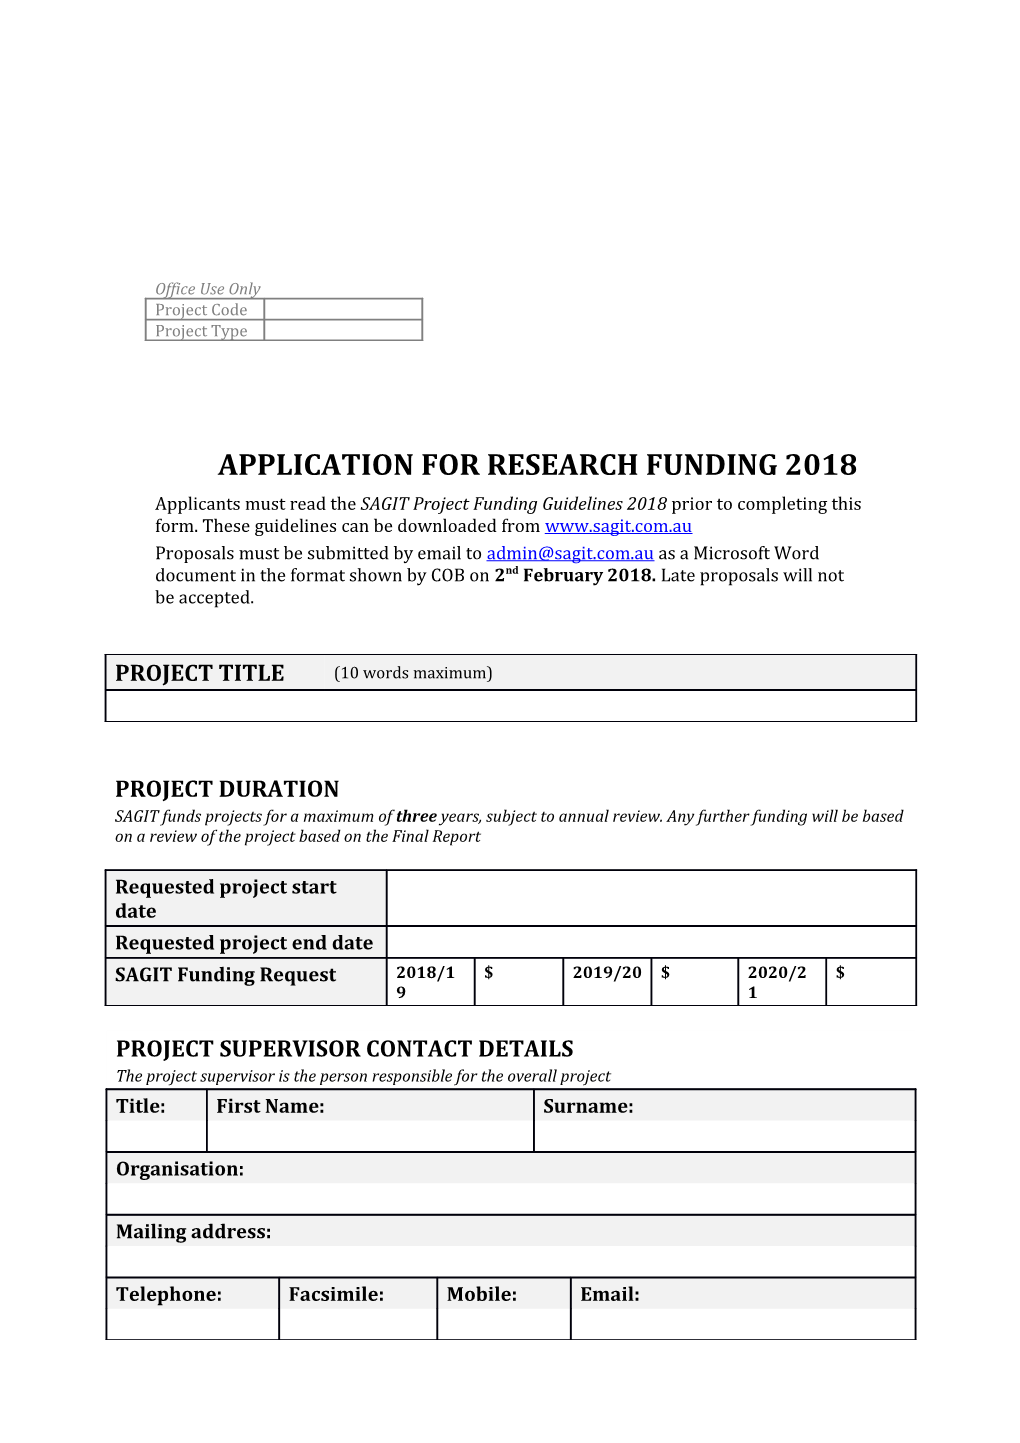 Application for Research Funding 2018